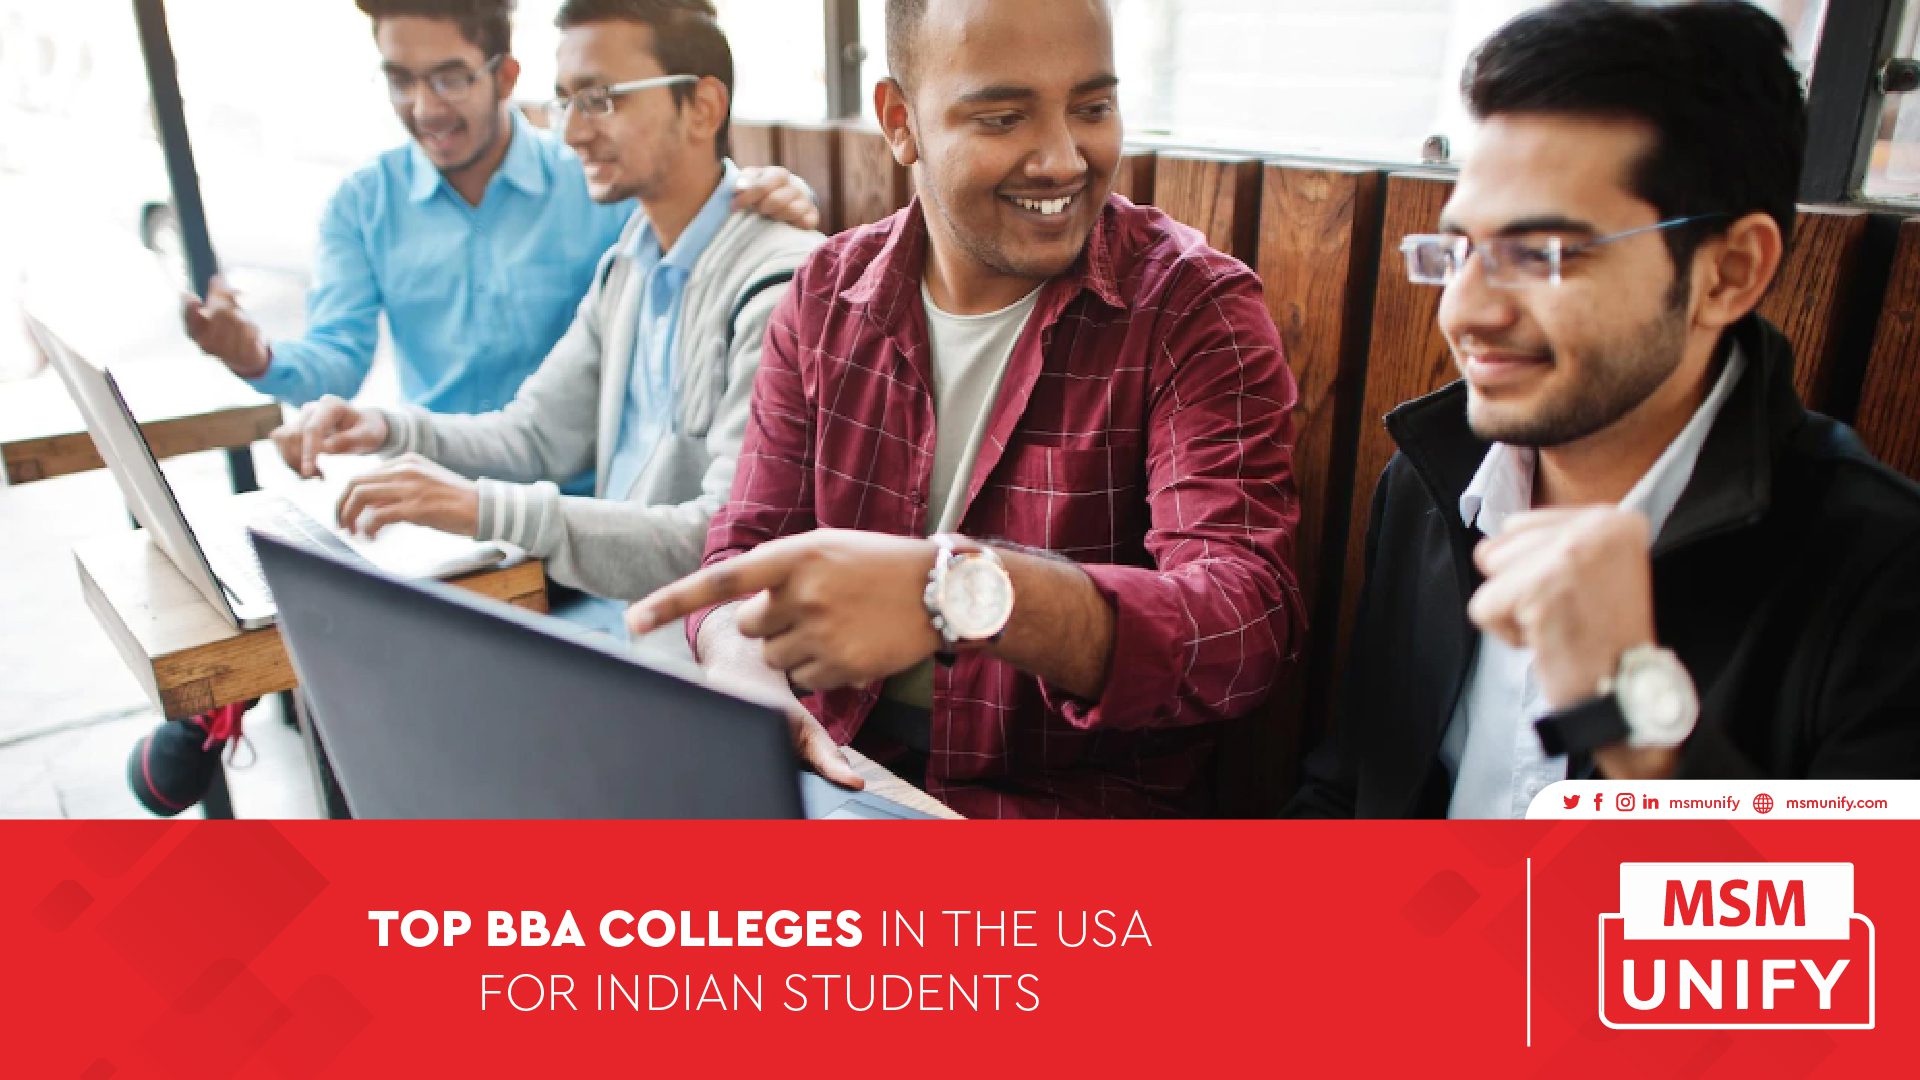 012323 MSM Unify Top BBA Colleges in the USA for Indian Students 01